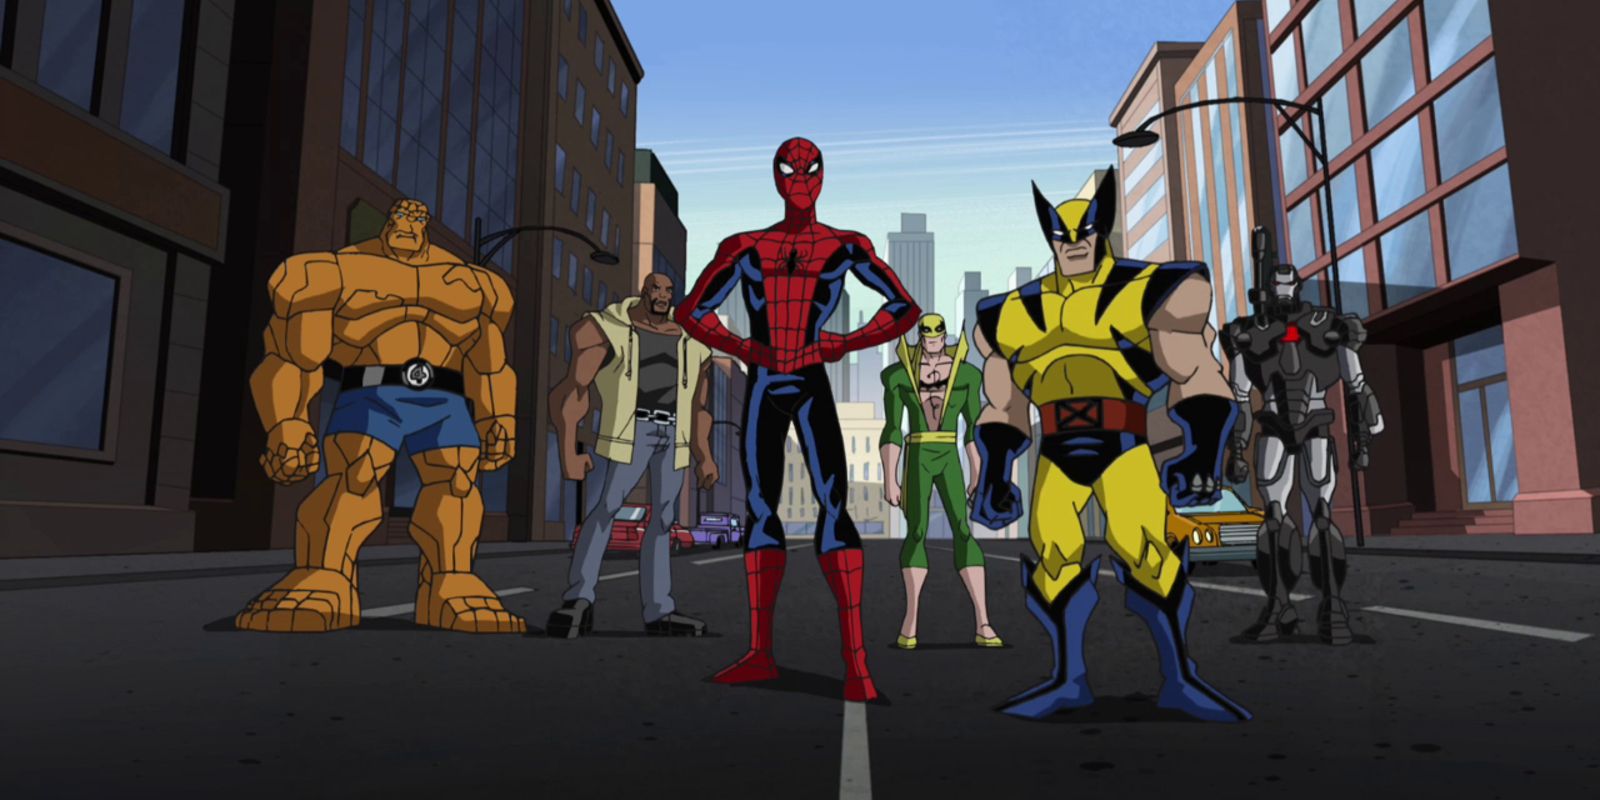 The New Avengers assembled in Avengers Earth's Mightiest Heroes